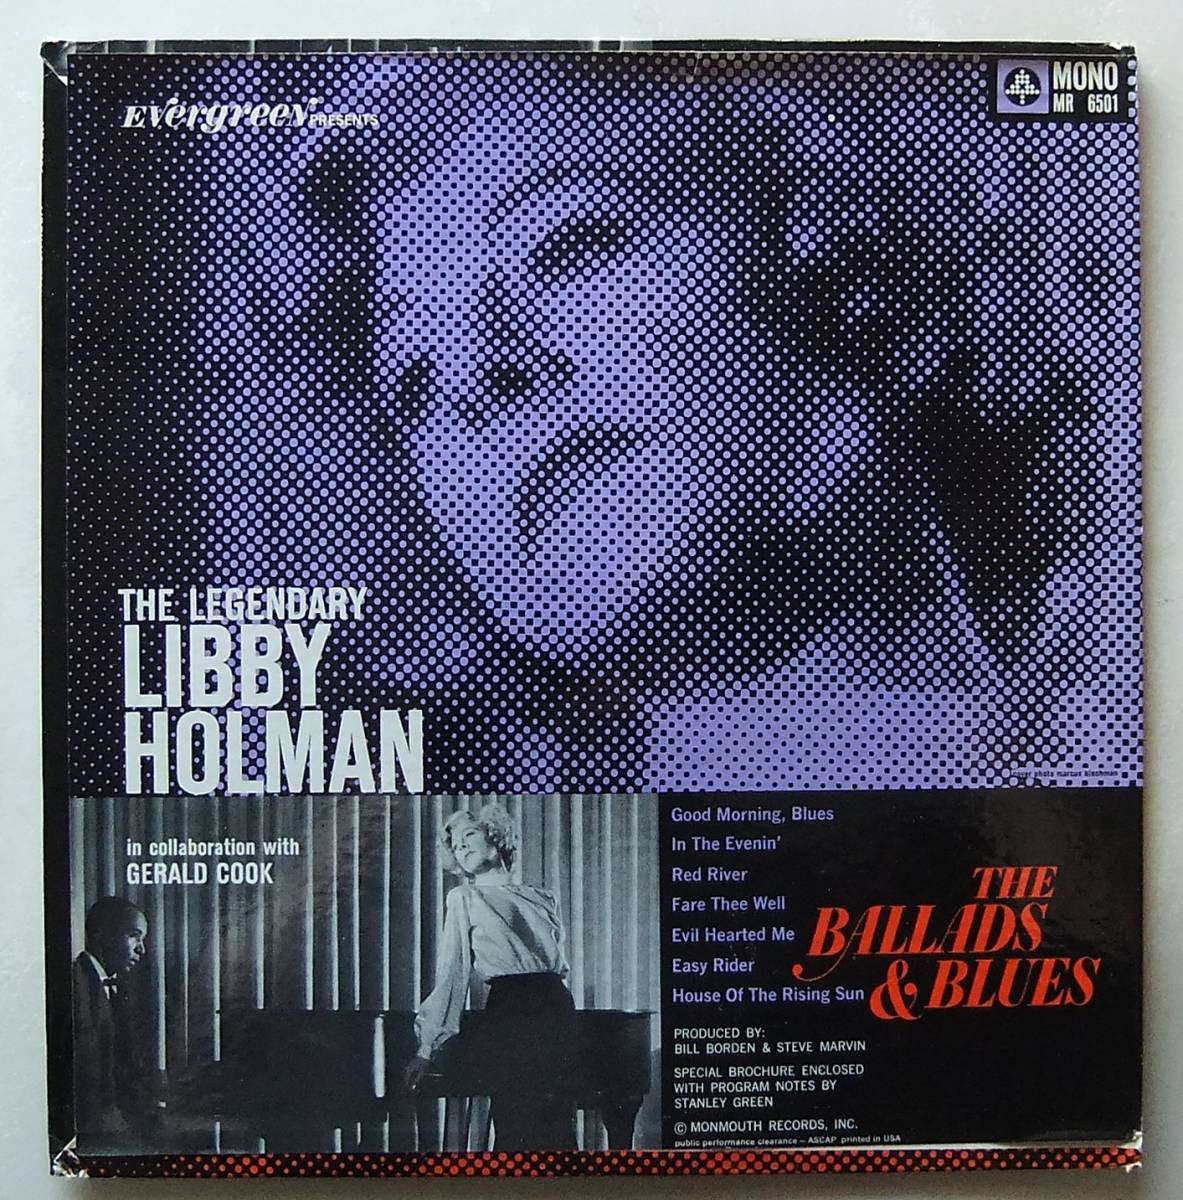 ◆ LIBBY HOLMAN / The Torch Songs ◆ Monmouth Evergreen MR 6501 ◆_画像2